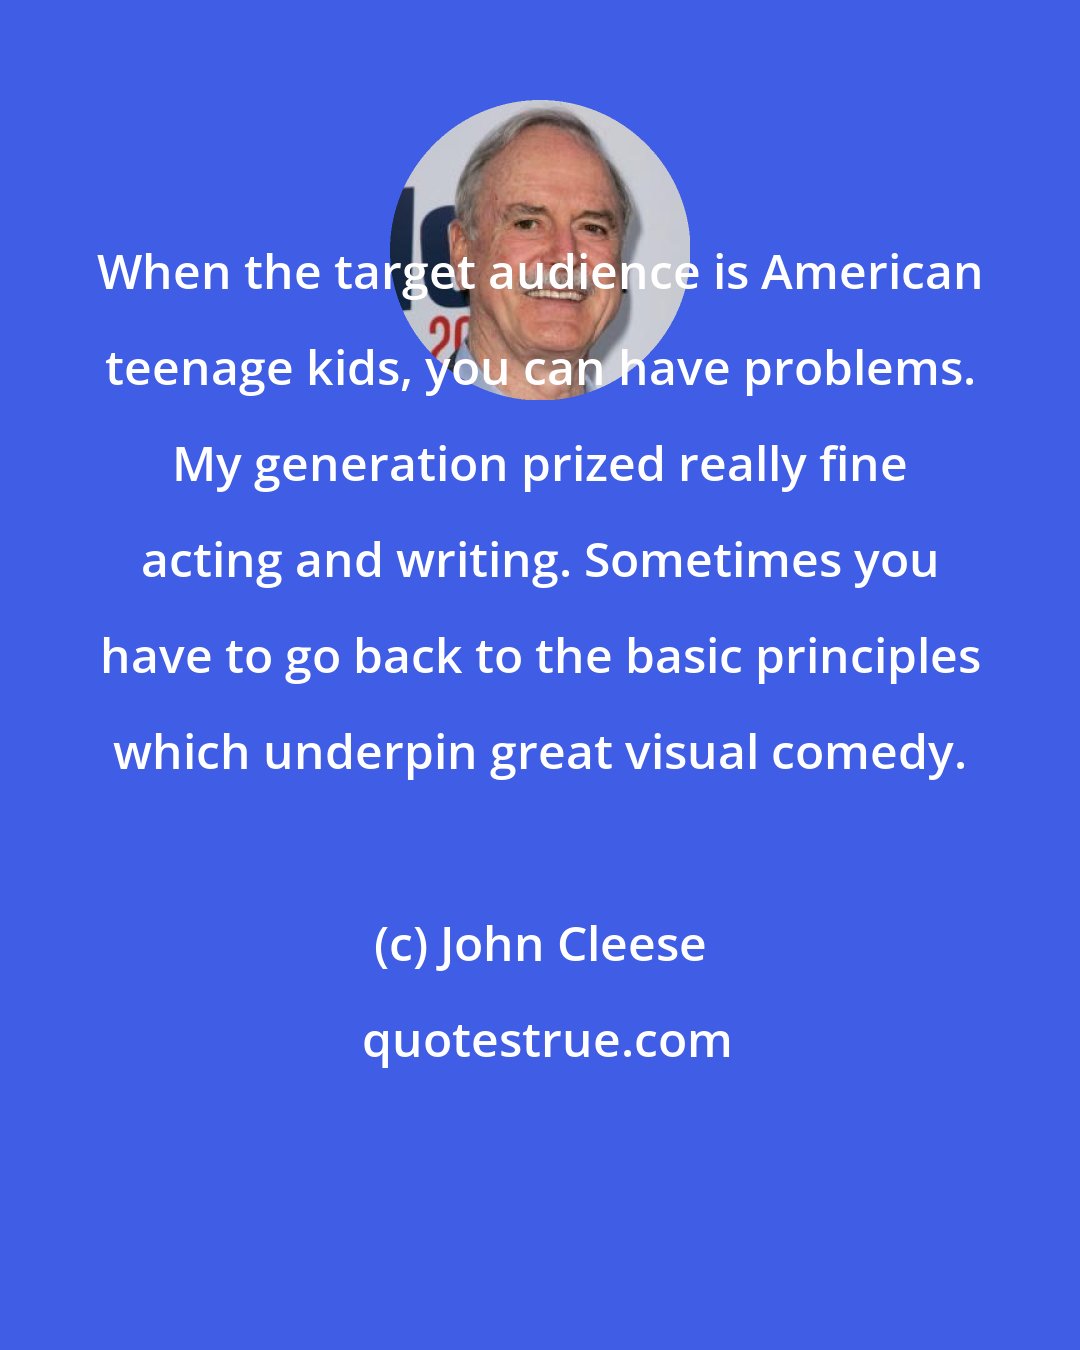 John Cleese: When the target audience is American teenage kids, you can have problems. My generation prized really fine acting and writing. Sometimes you have to go back to the basic principles which underpin great visual comedy.